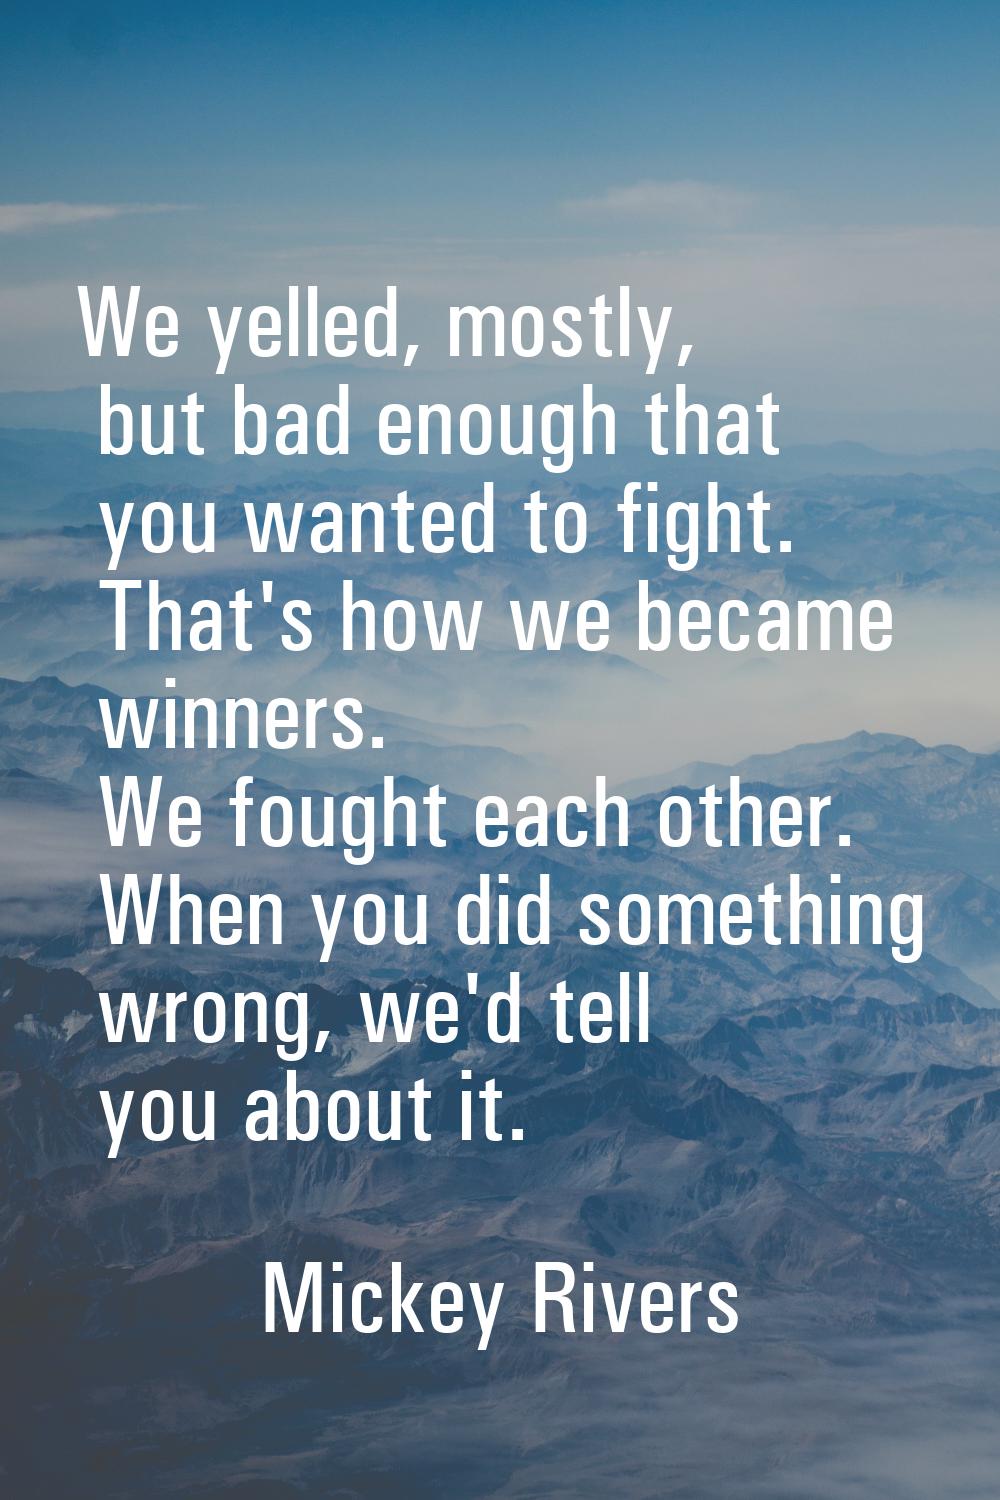 We yelled, mostly, but bad enough that you wanted to fight. That's how we became winners. We fought